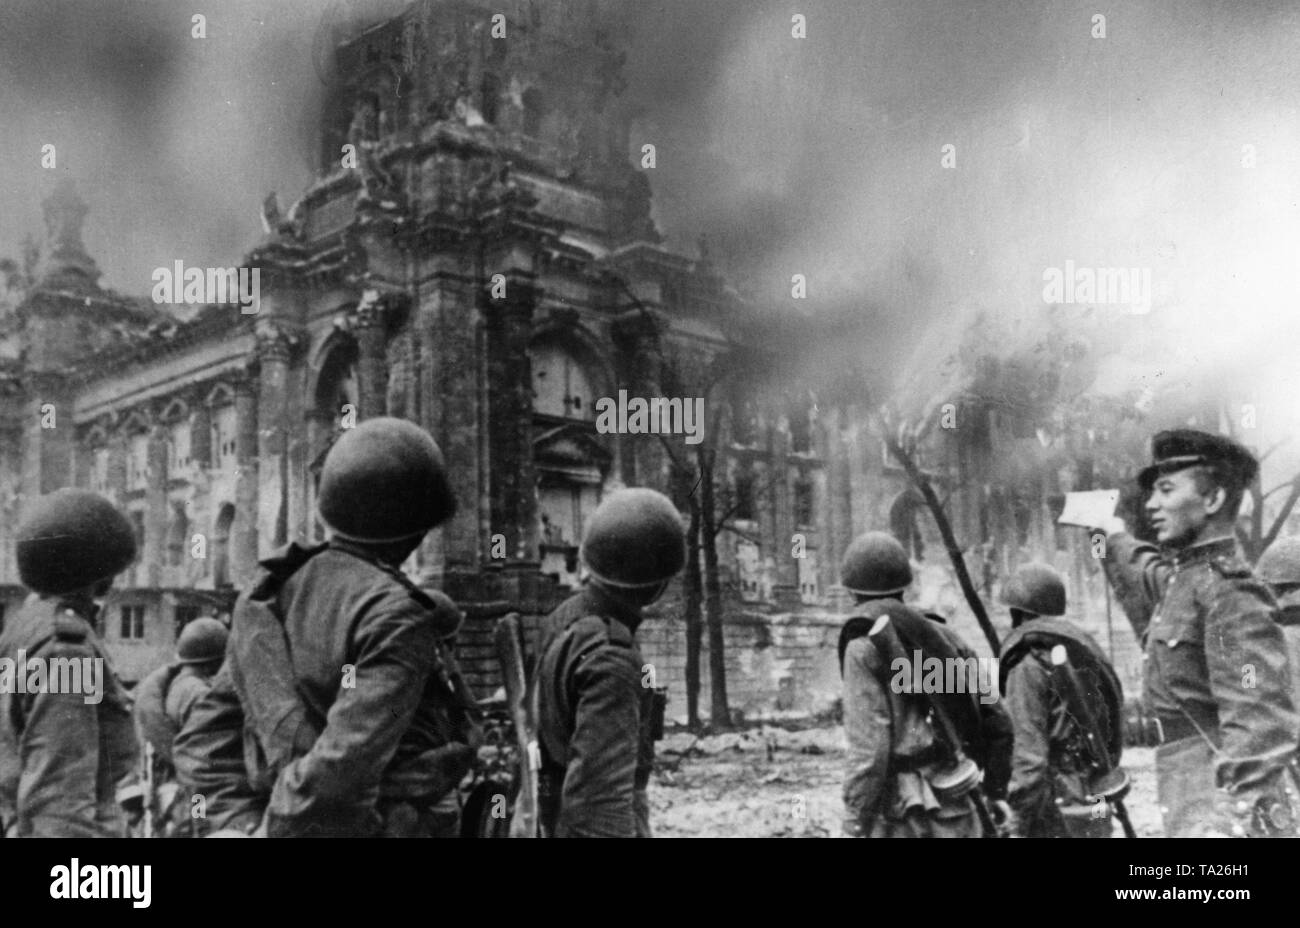 Russian soldiers in front of the burning Reichstag building, Berlin, Germany, 1945 Stock Photo